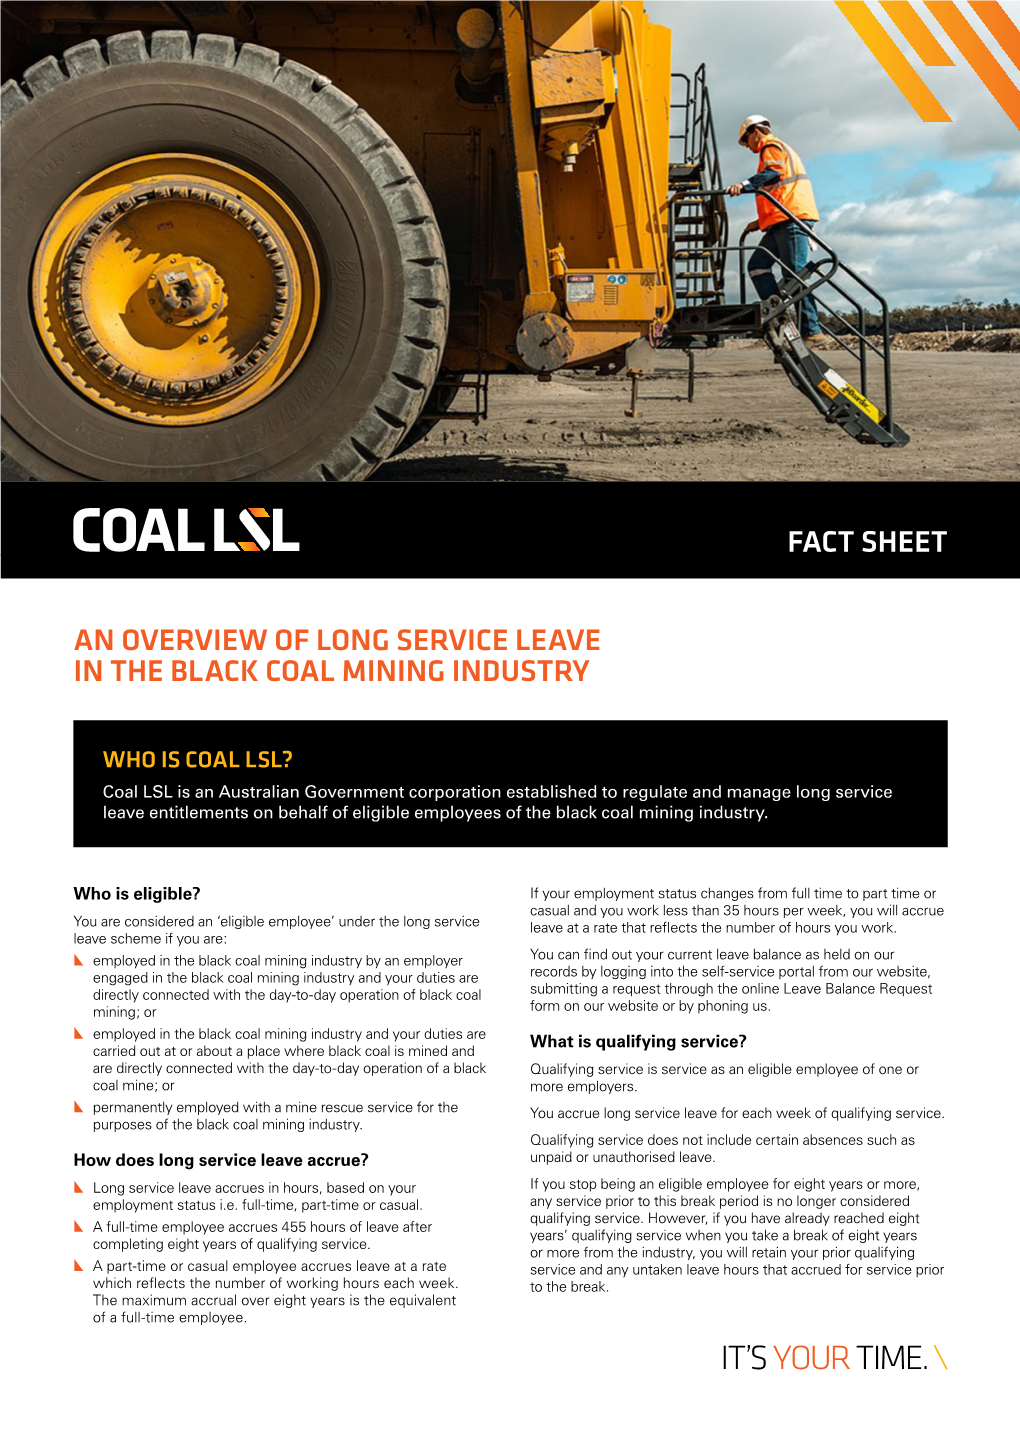 Overview of Long Service Leave in Black Coal Mining